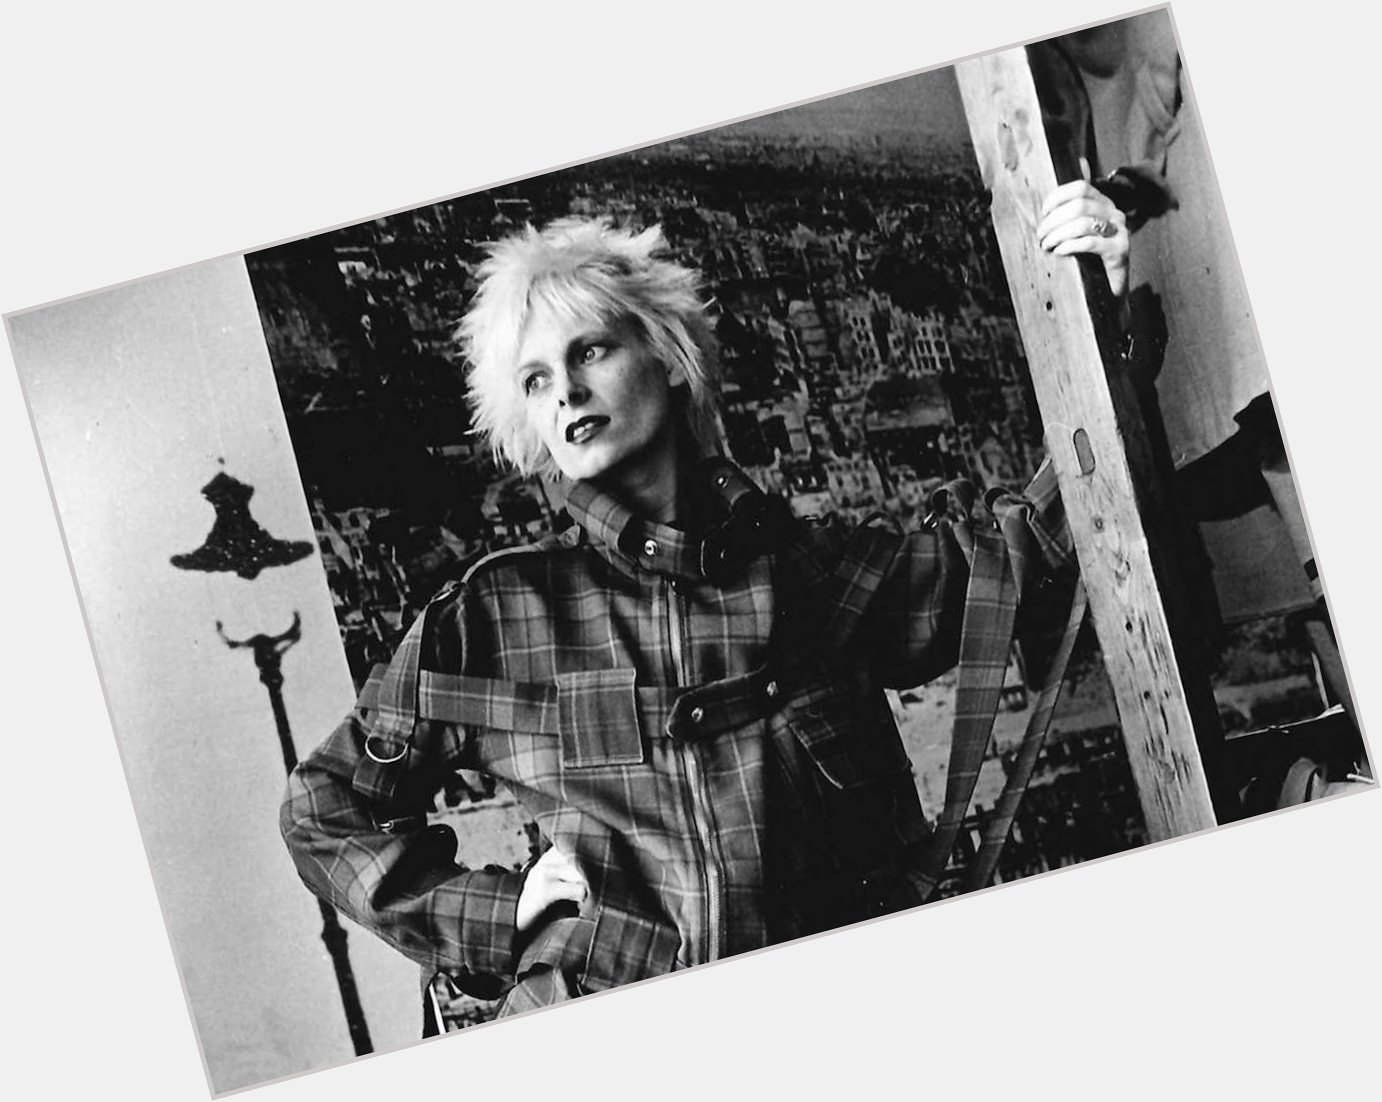 Happy birthday to one of my favorite designers, the queen of punk vivienne westwood. Fashion icon forever 